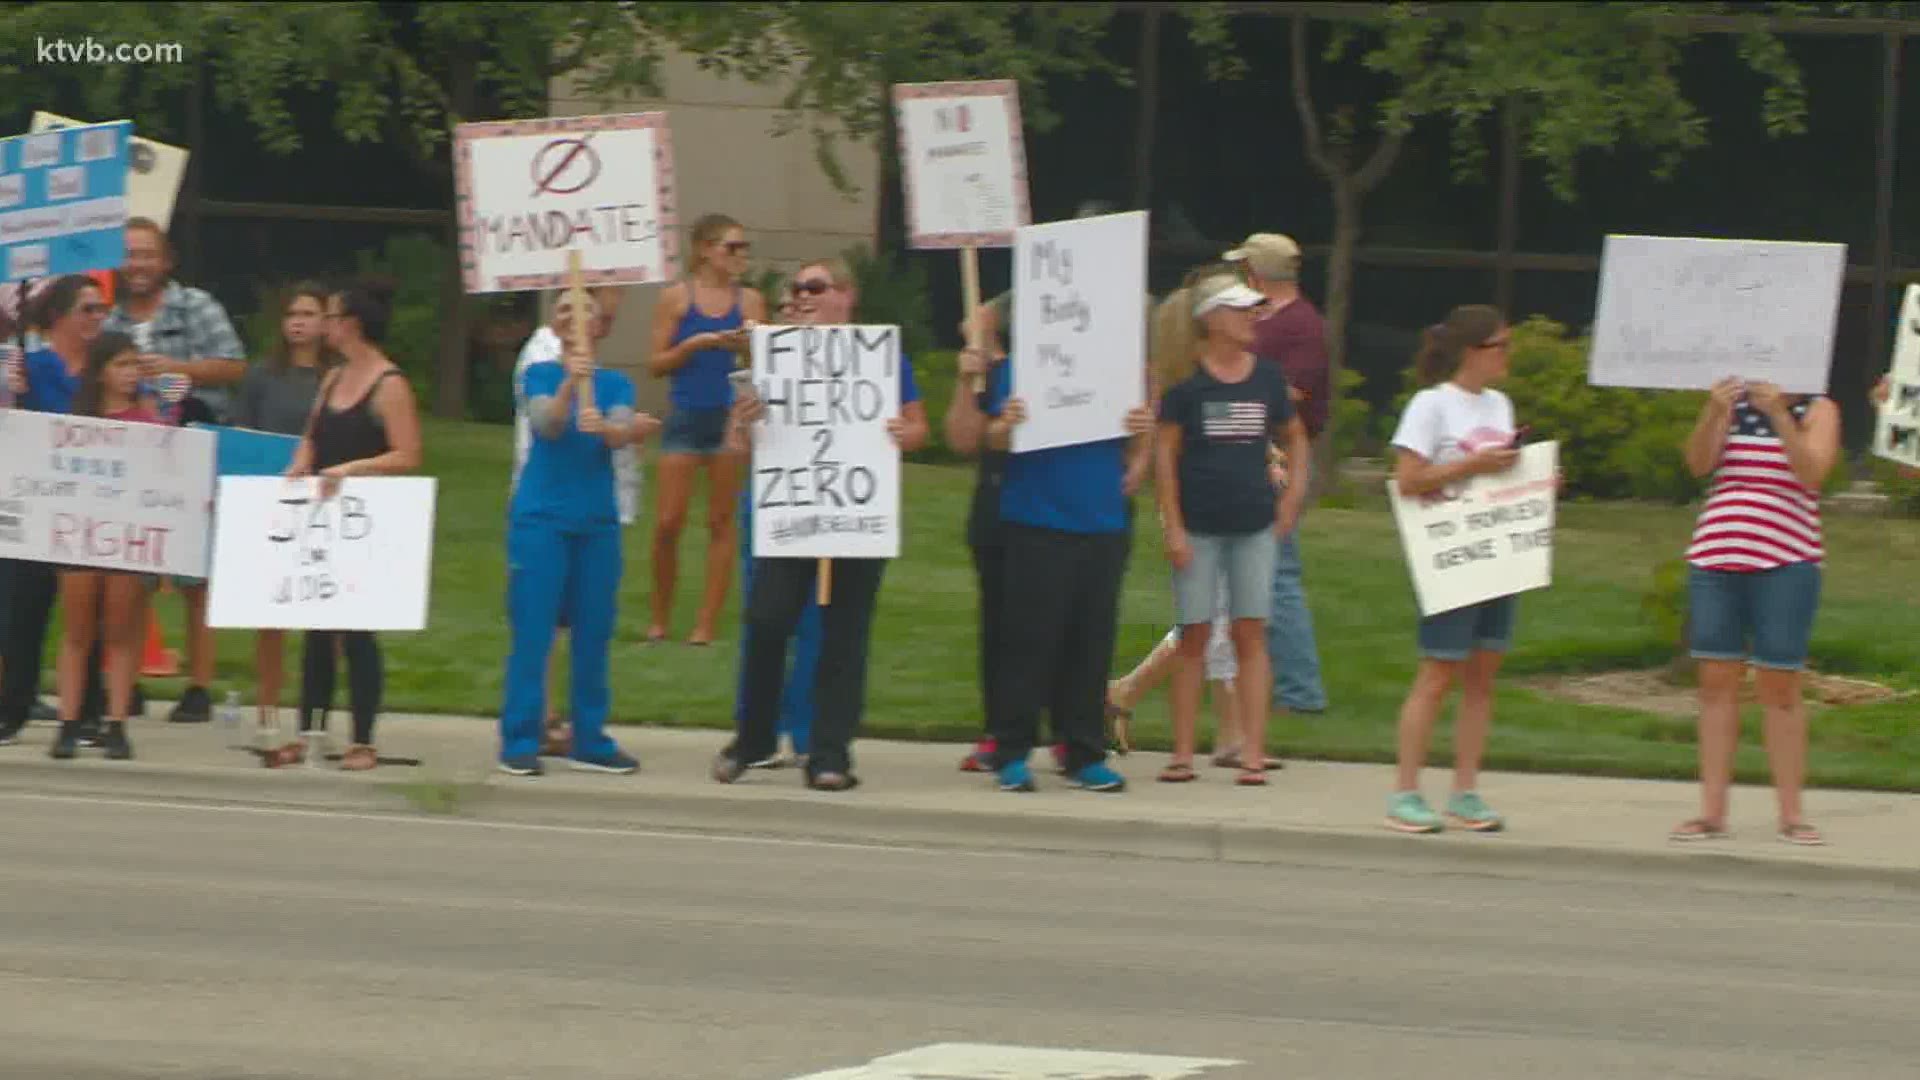 Protestors gathered for the second time in as many weeks to oppose required COVID-19 vaccinations for staff at St. Luke's, Saint Alphonsus, and Primary Health.